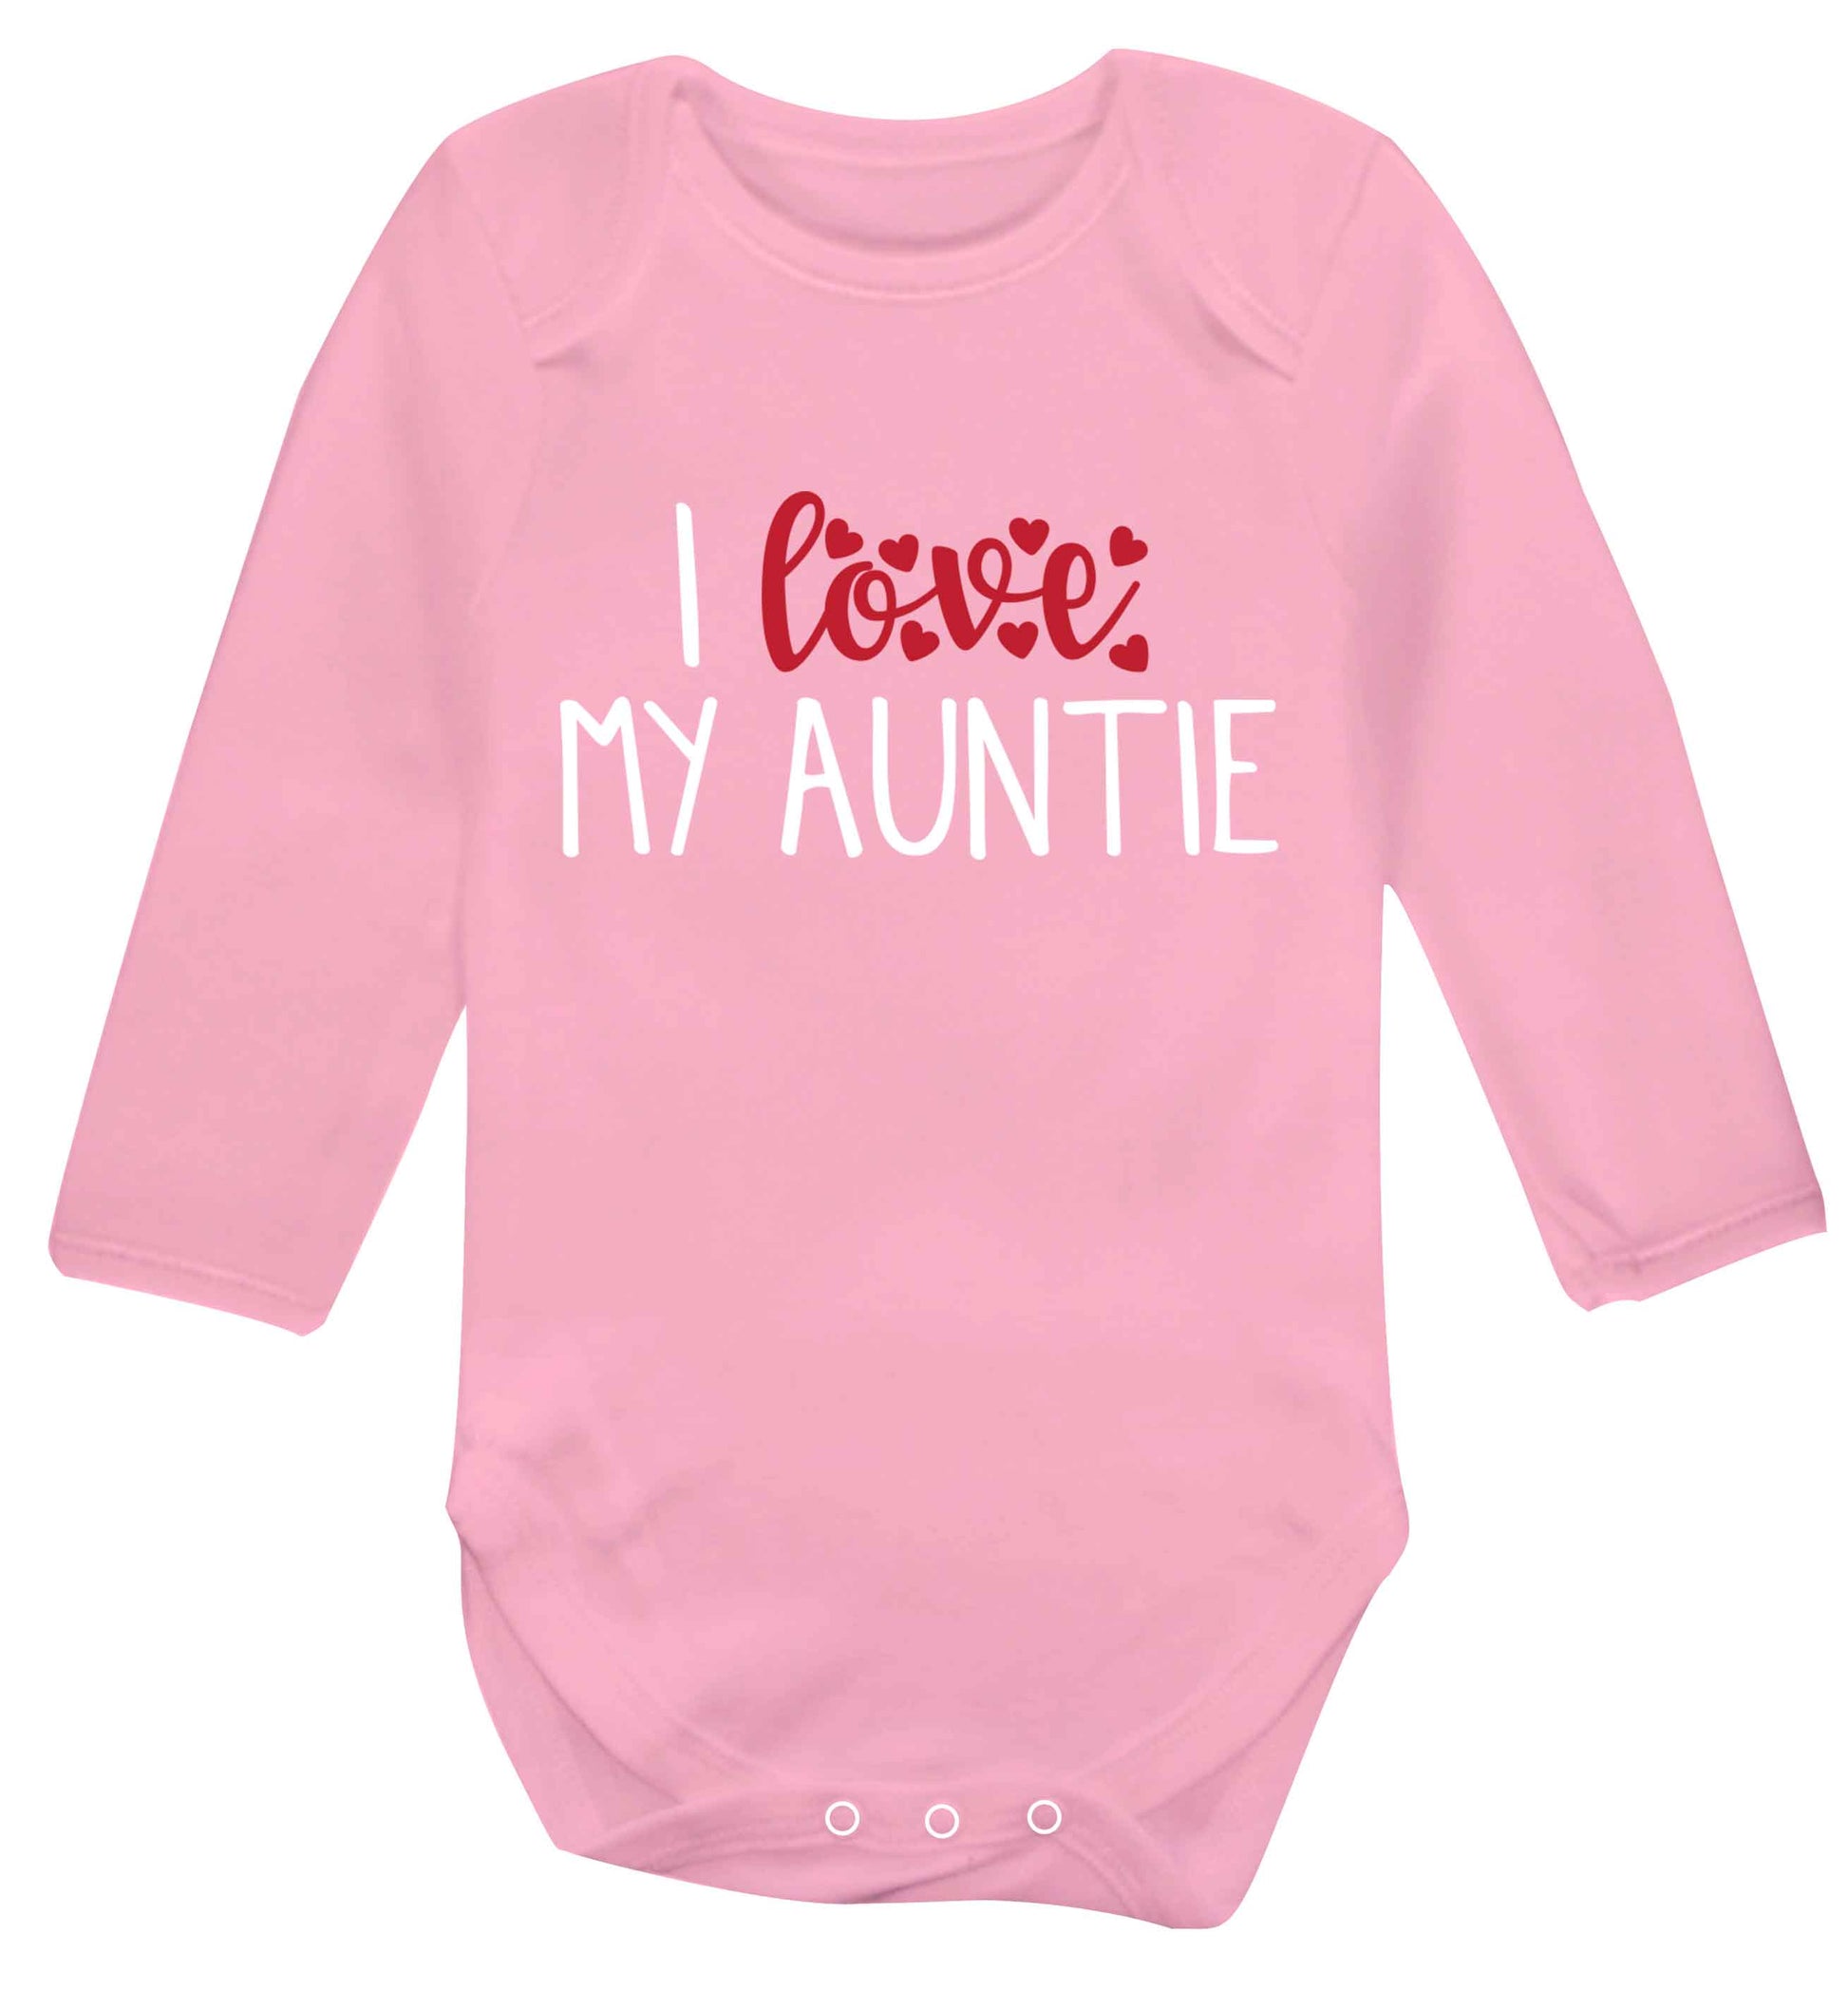 I love my auntie Baby Vest long sleeved pale pink 6-12 months